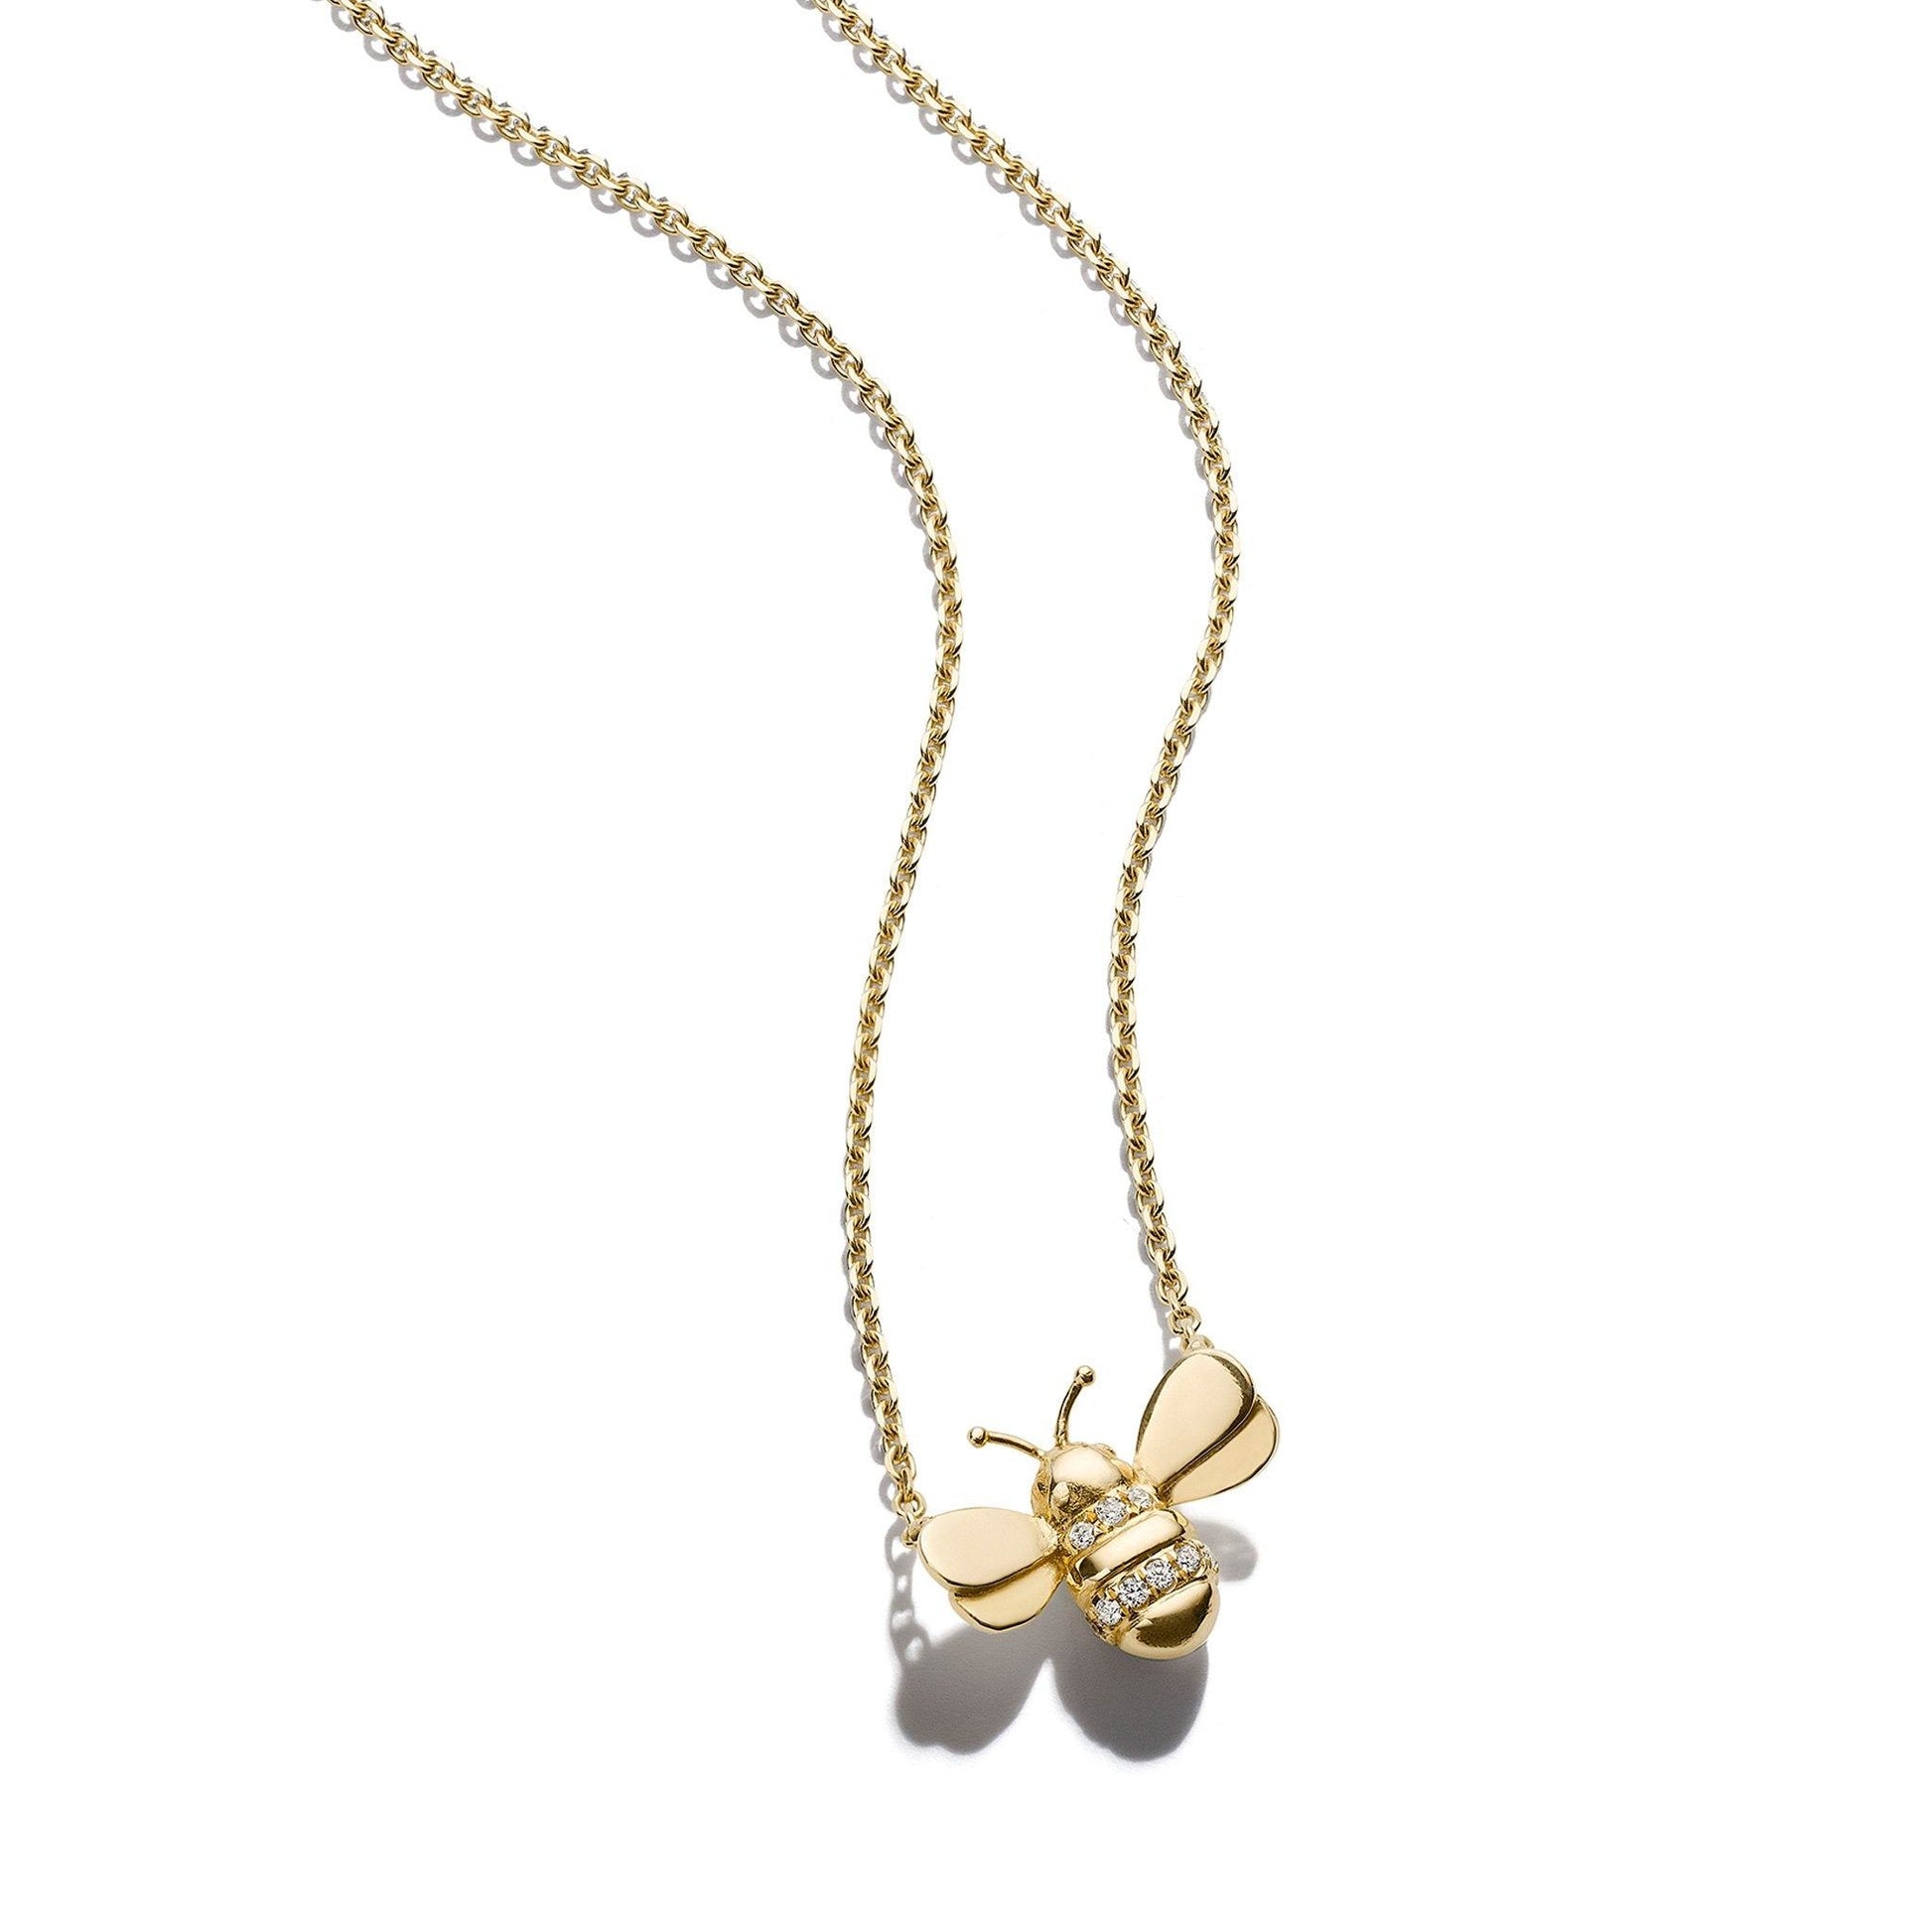 Mimi-So-Wonderland-Bumble-Bee-Necklace_18k Yellow Gold